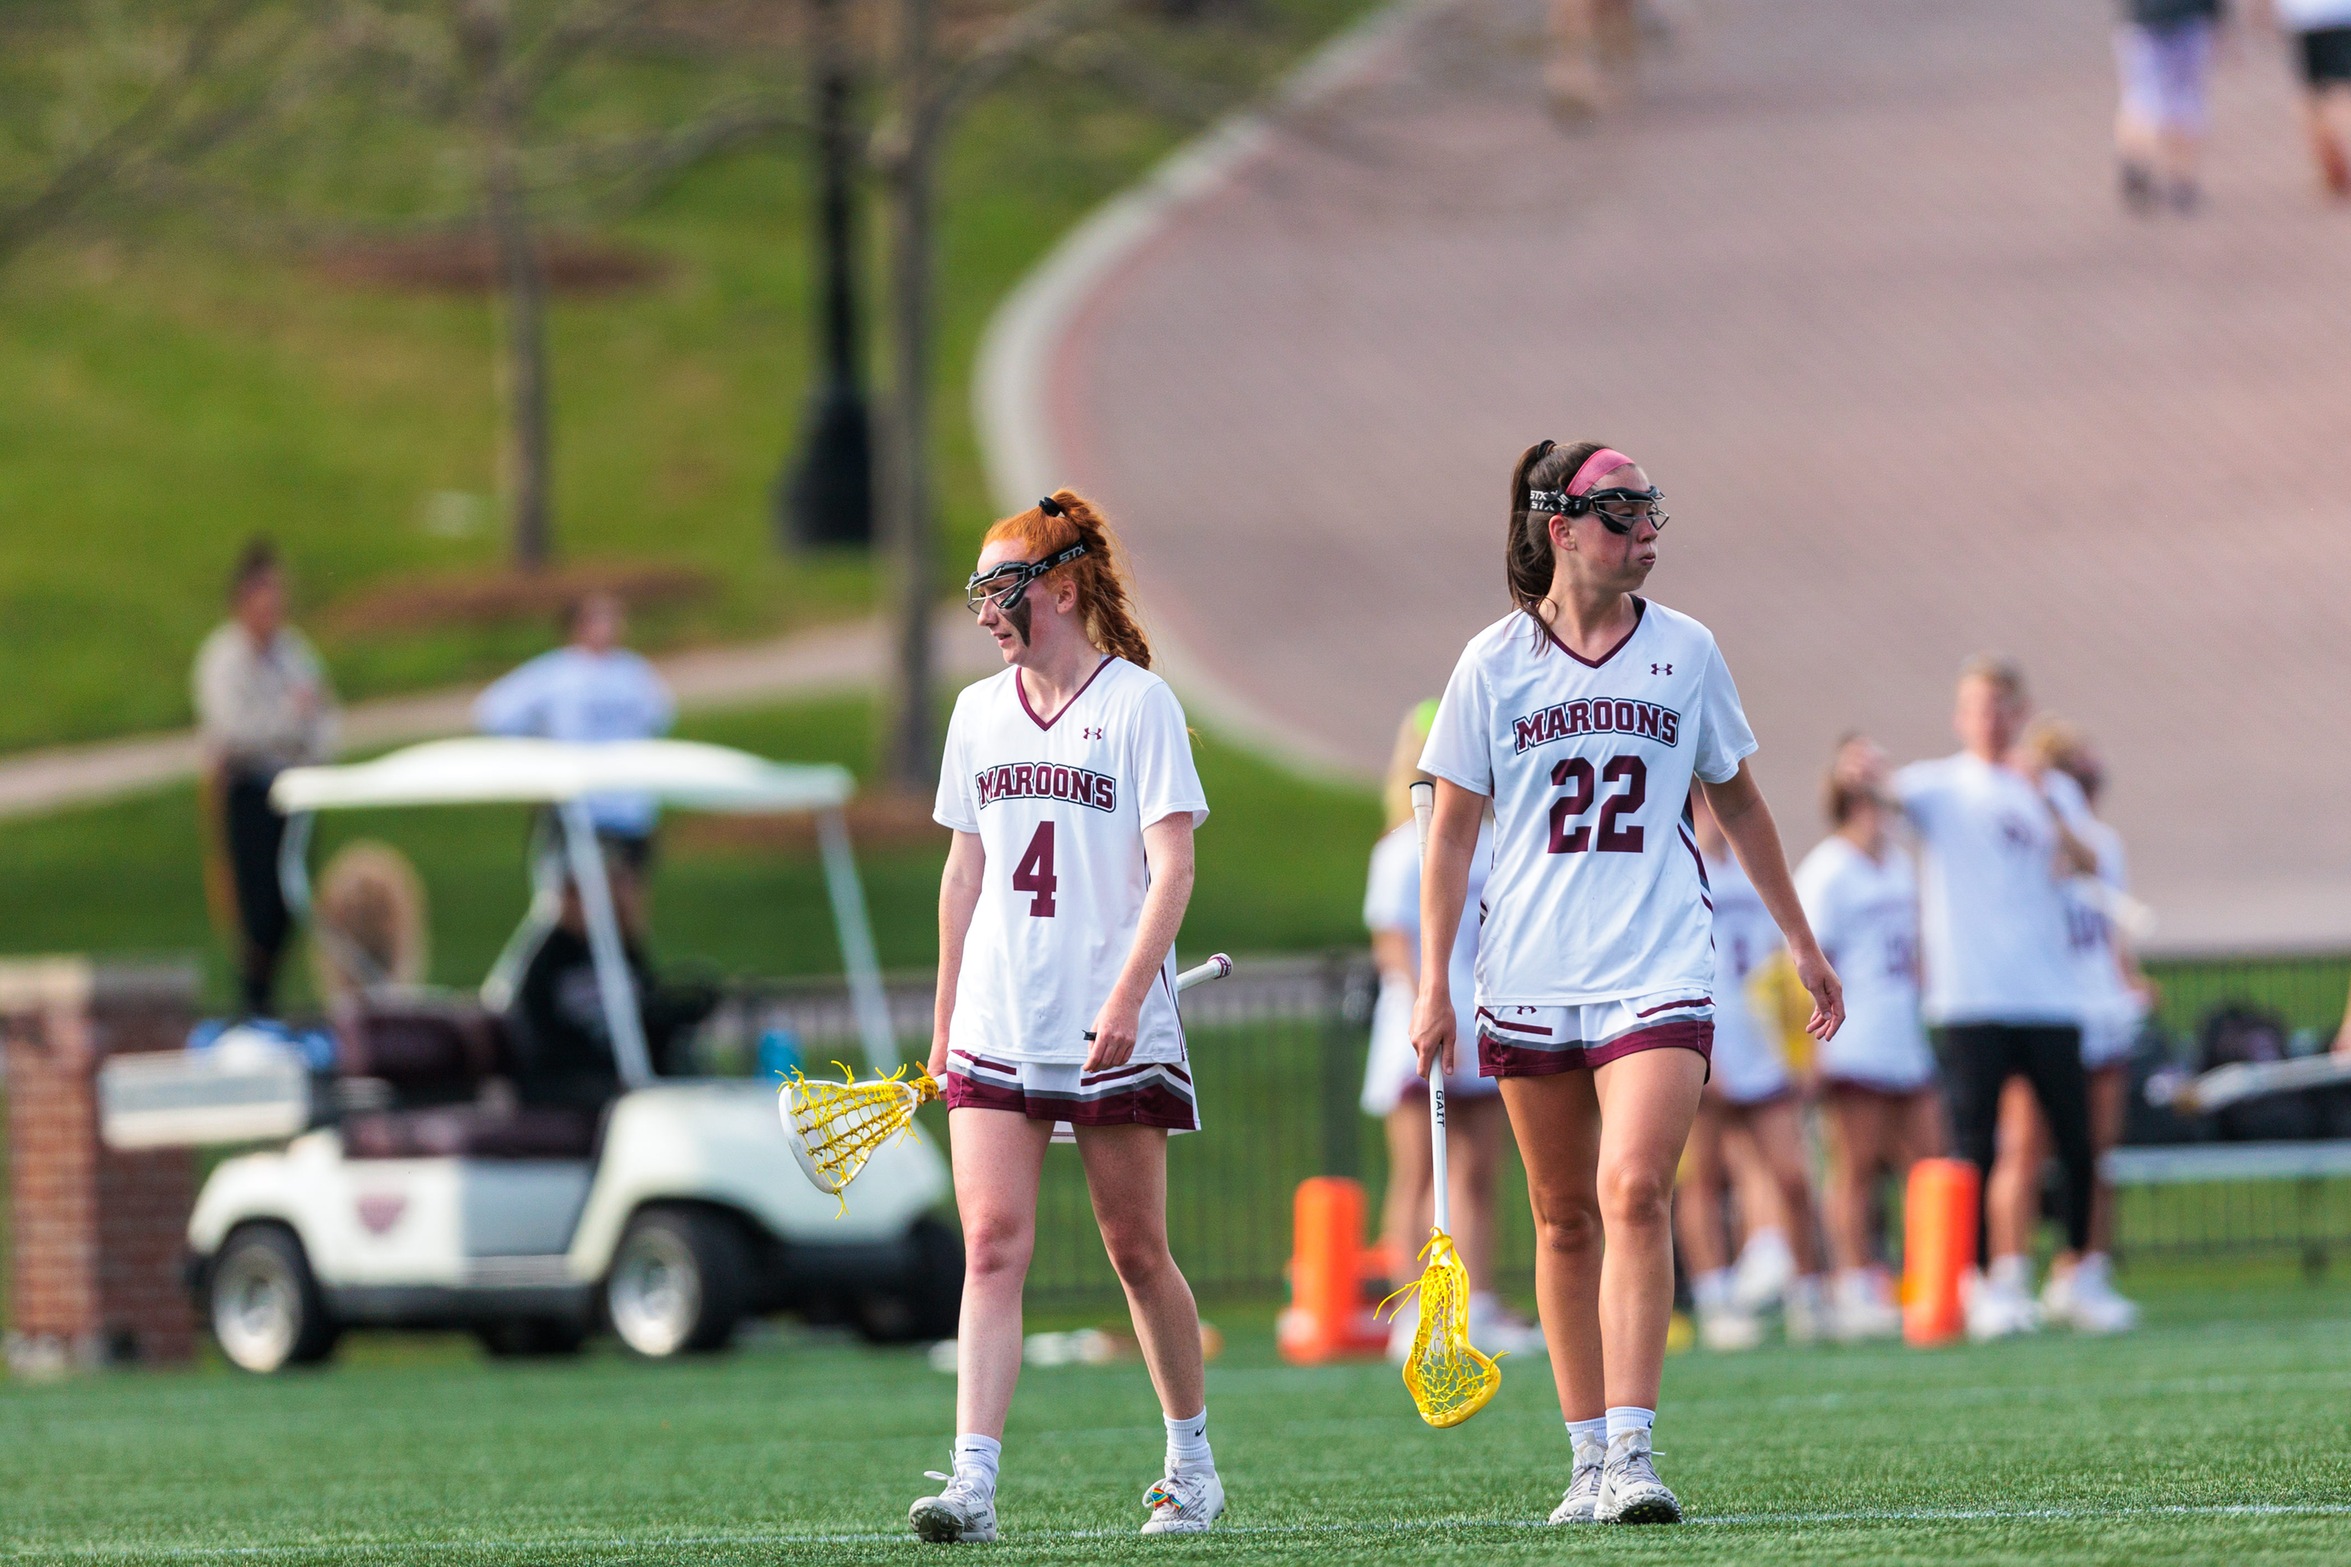 action photo of Molly Kasemeyer (4) and Riley Chase (22) in women's lacrosse game